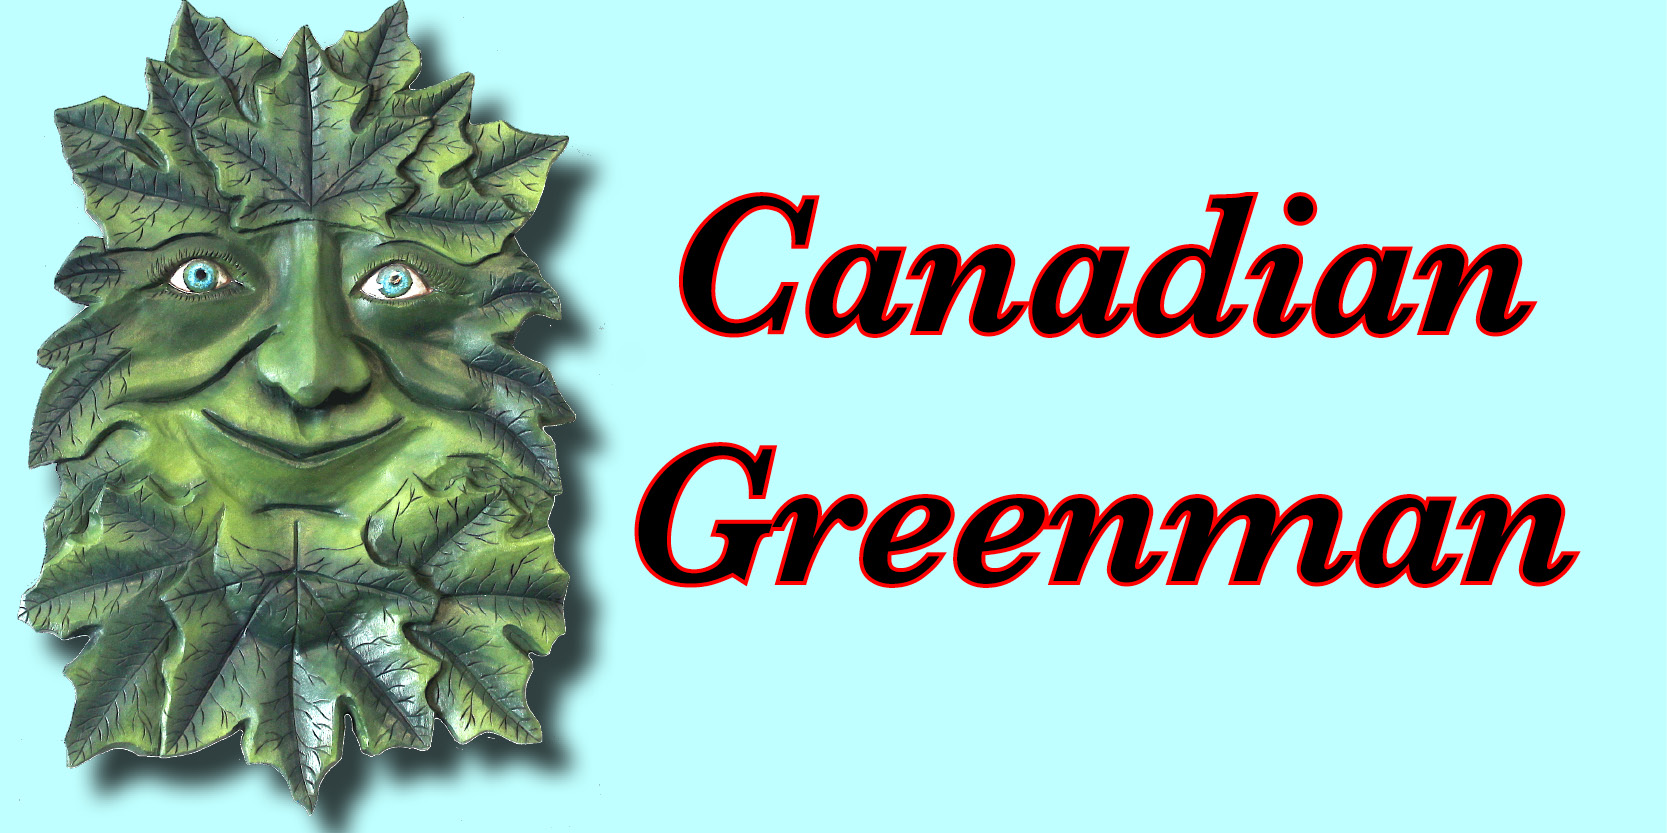  Canadian greenman dwcarving, wood carving, climate change art, climate change artist